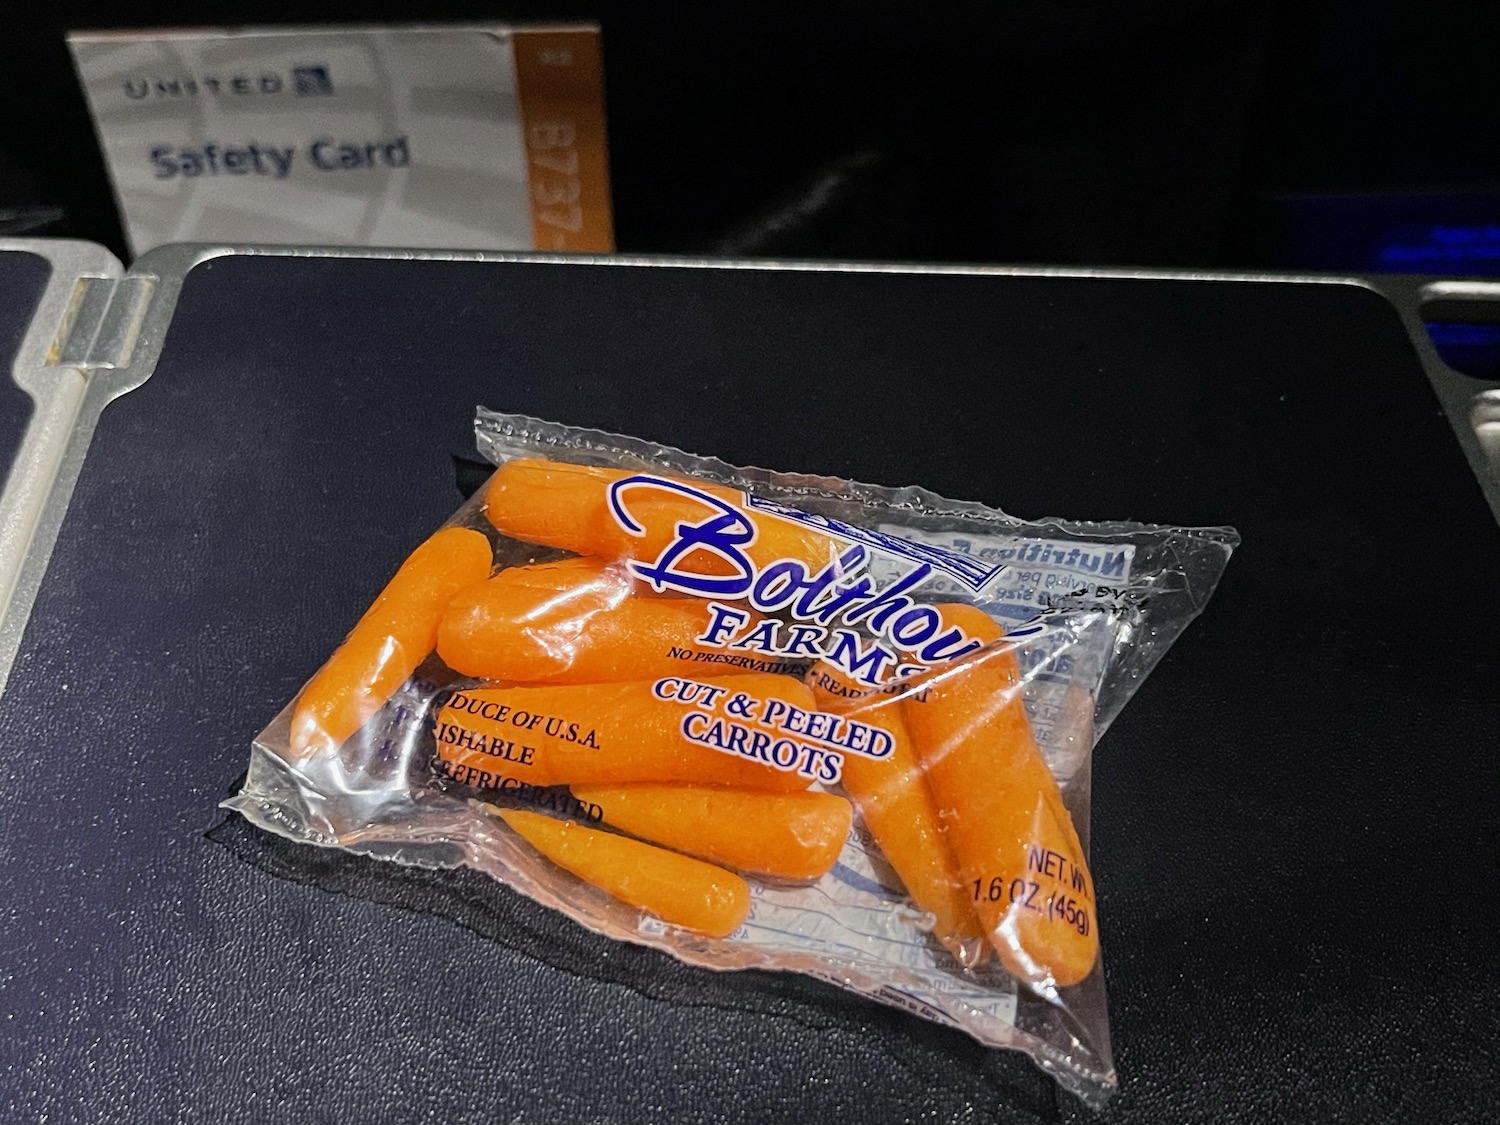 a bag of carrots on a black surface